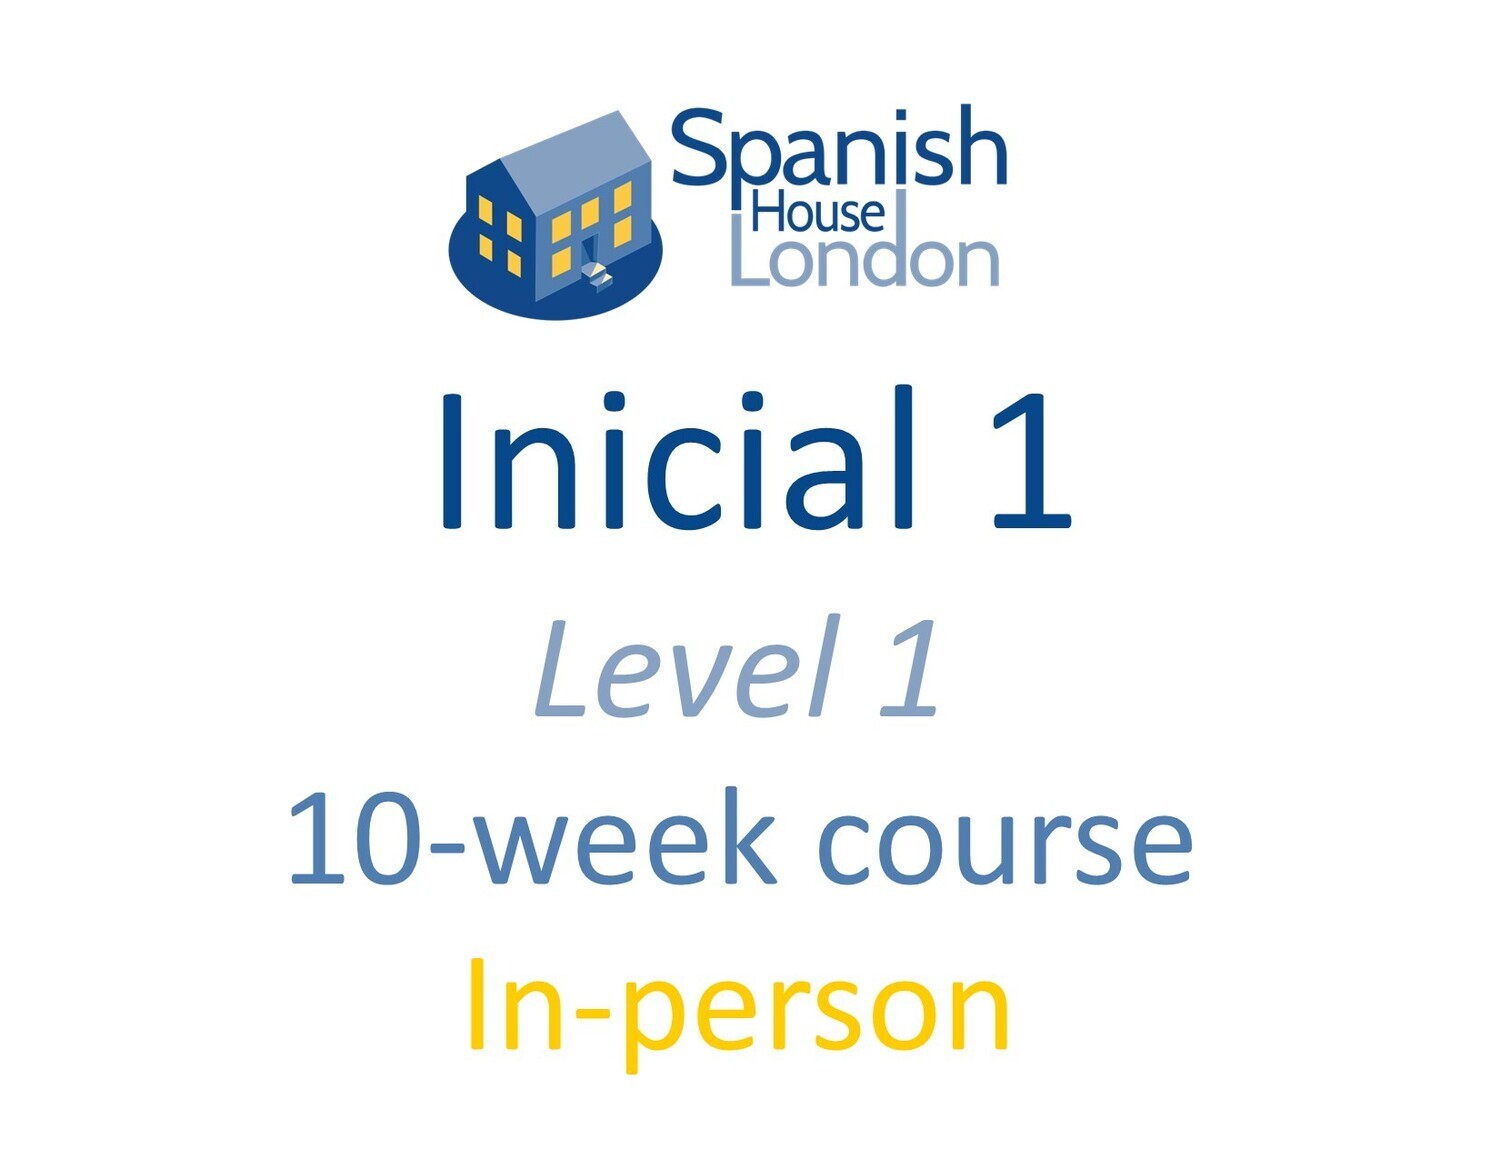 Inicial 1 Course starting on 30th May at 7.30pm in Clapham North